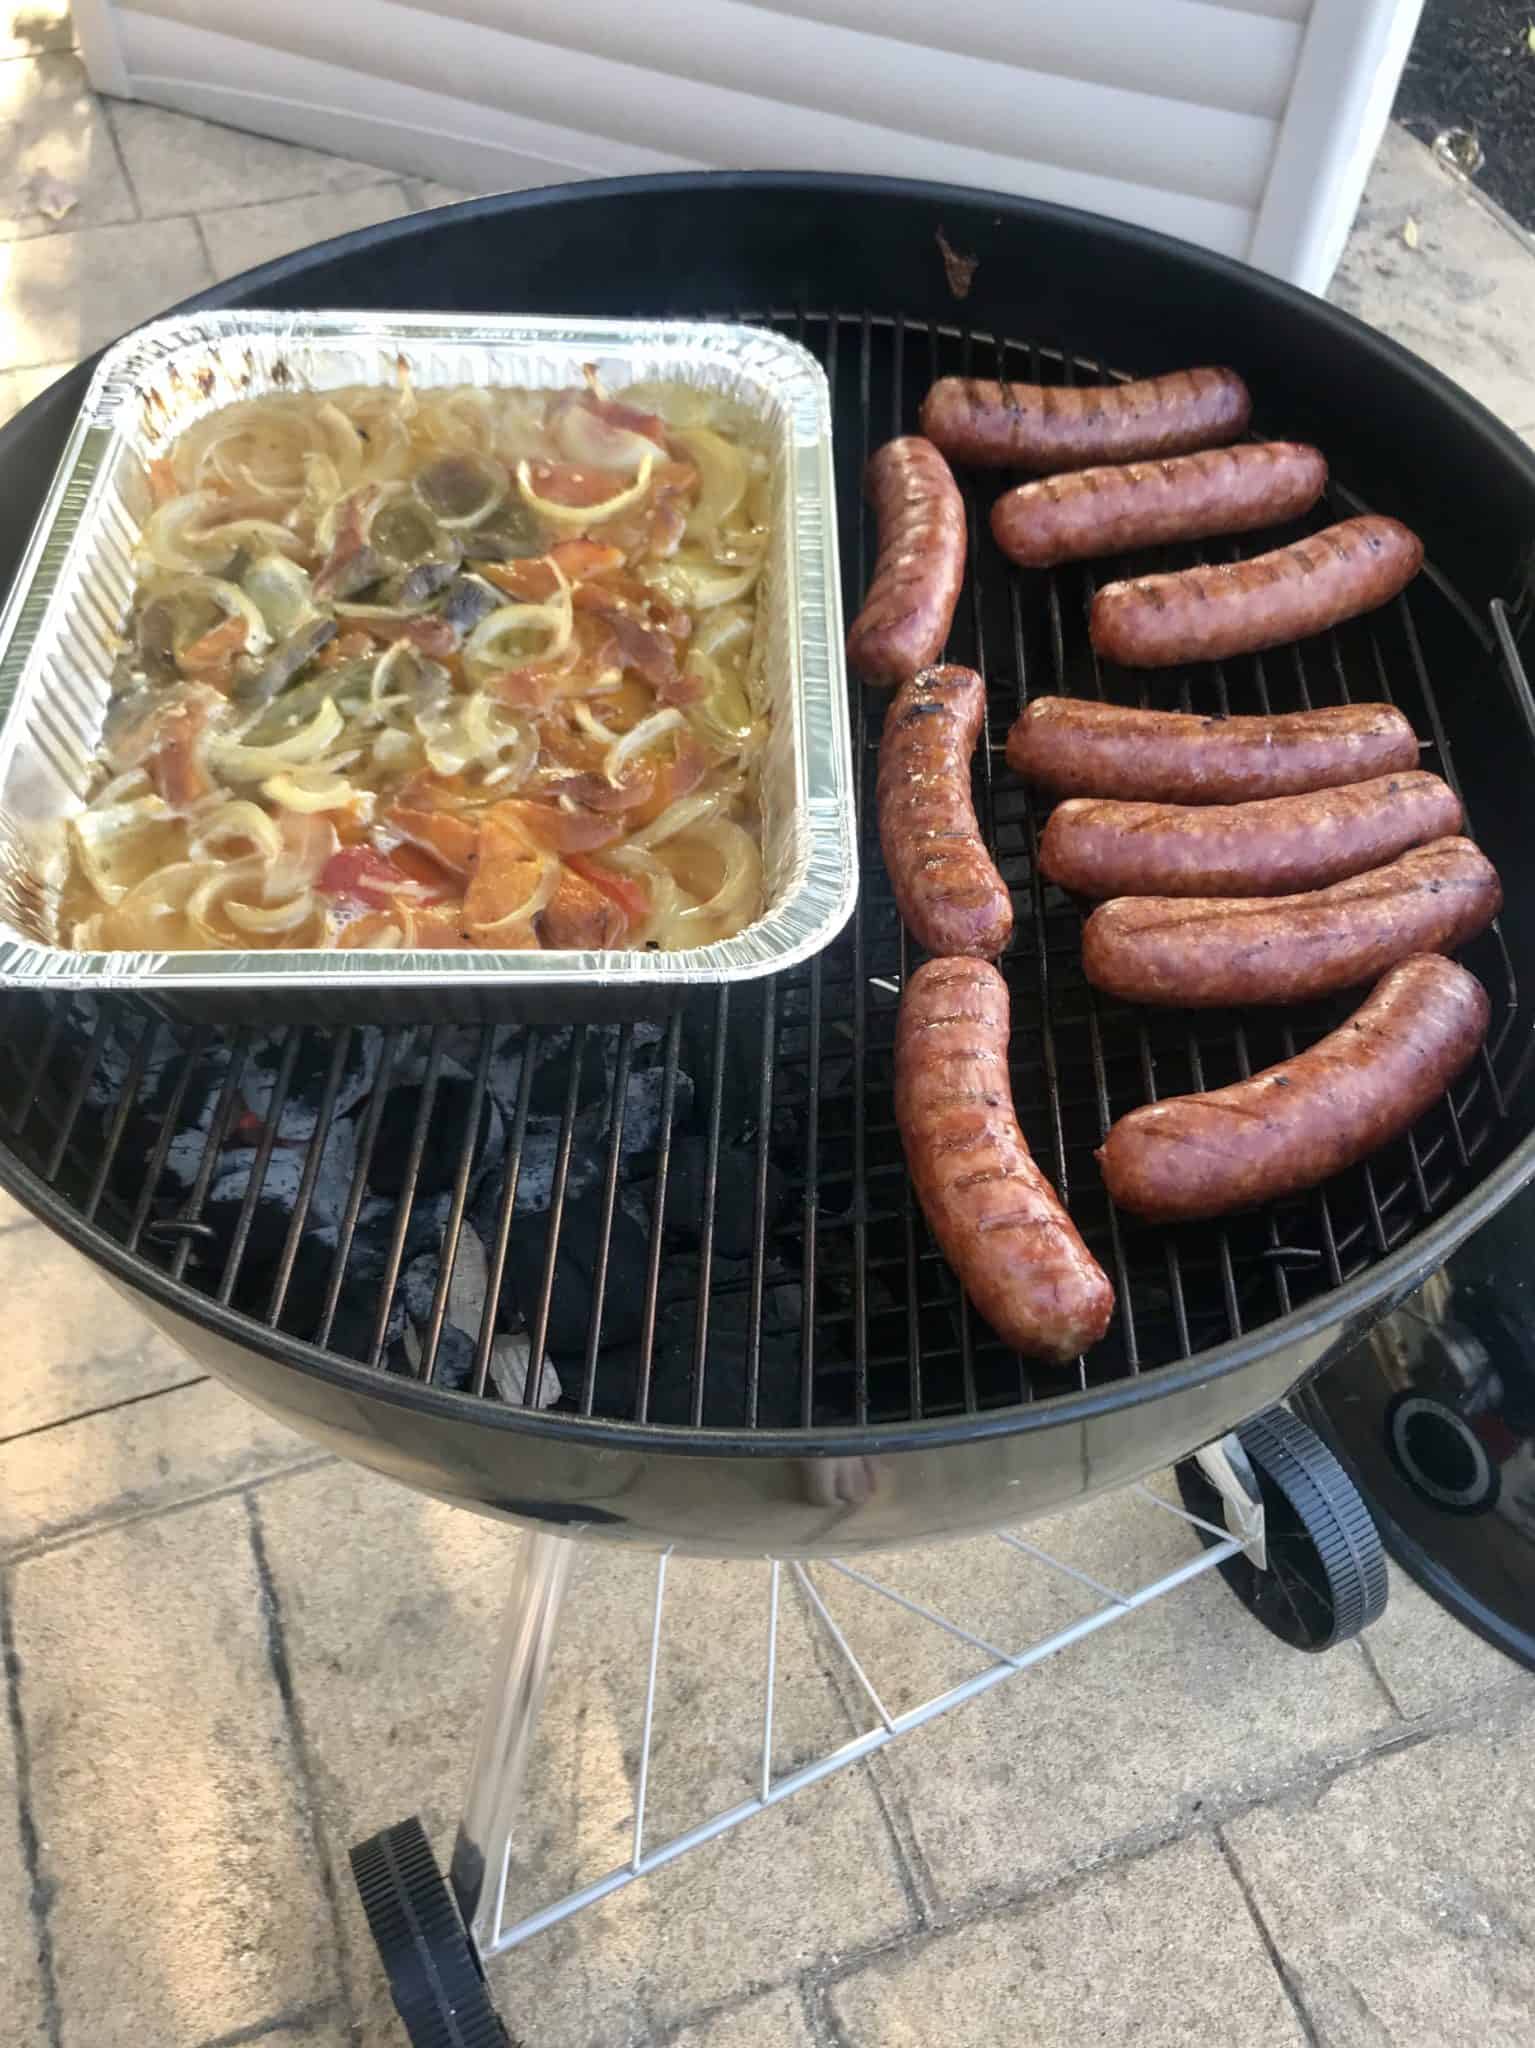 Sausage and Peppers cooked on weber grill side view 